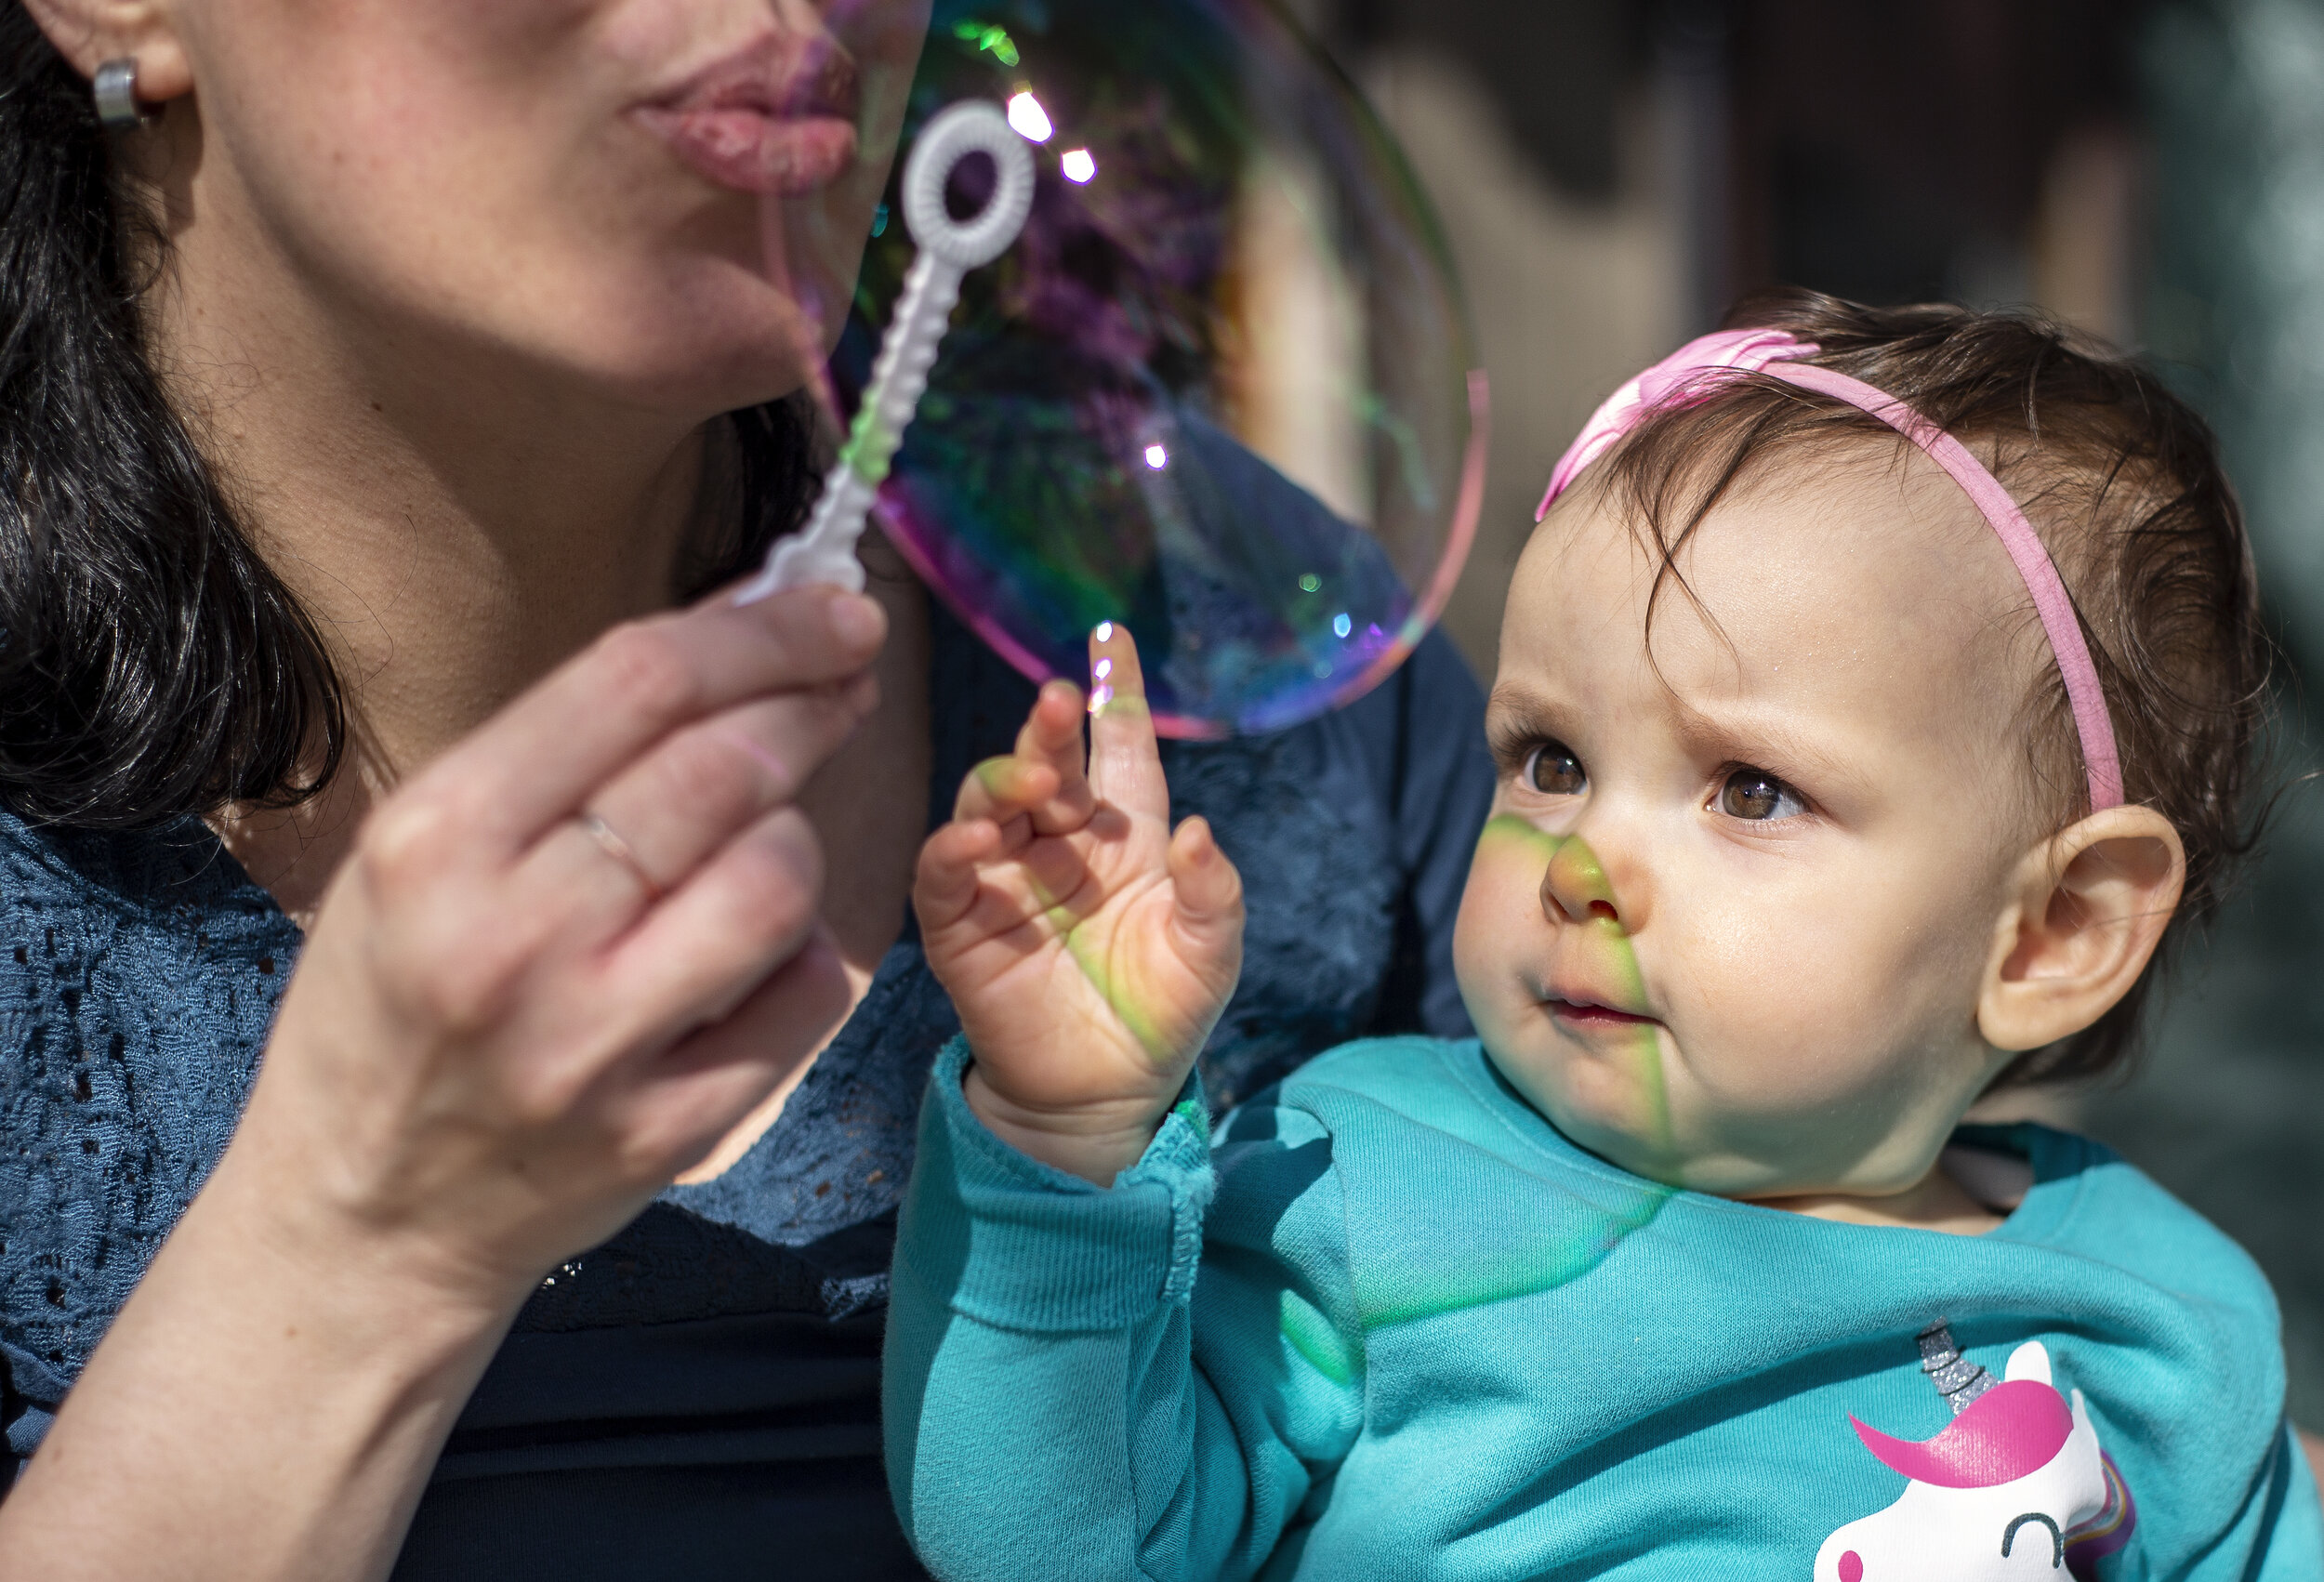  Isadora plays with bubbles for the first time on the family’s back porch on March 18, 2021. It is rare for Isadora to leave the house, so Souza likes to take her outside where she can explore and nurture her curiosity in a way that’s safe. 